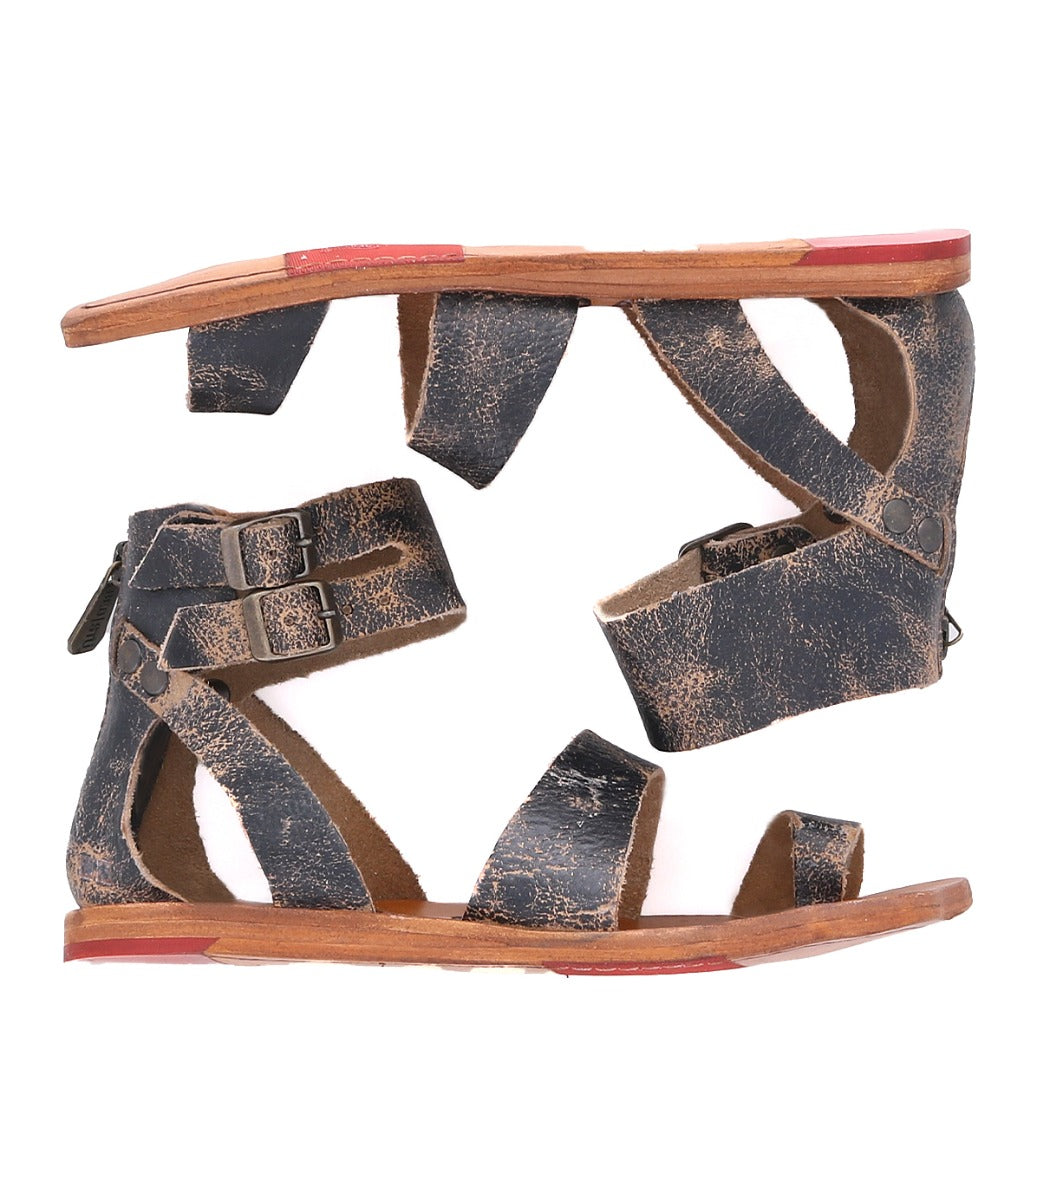 A pair of Bed Stu Afrodita sandals with straps and buckles.